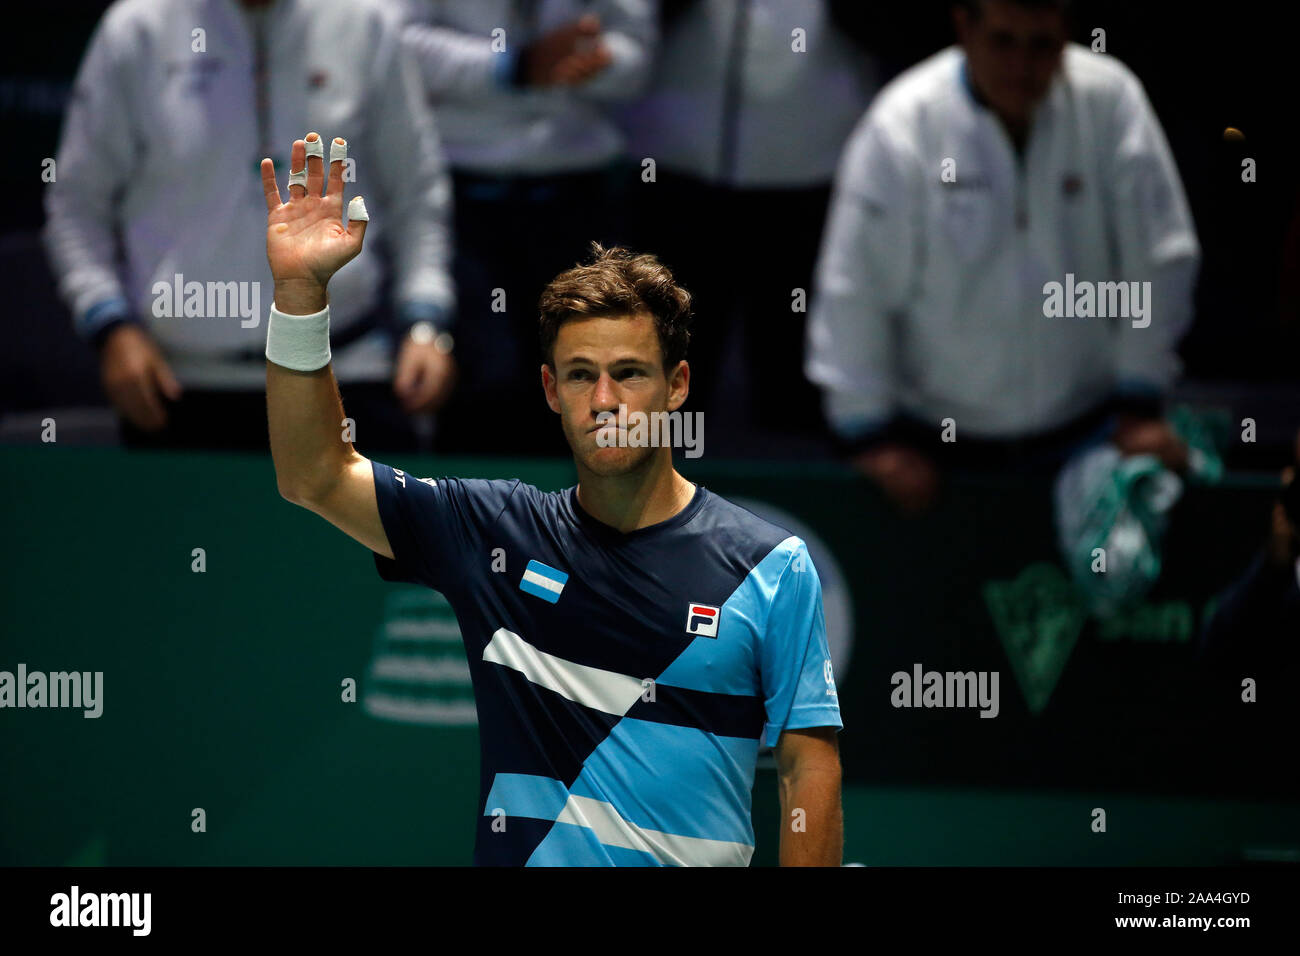 Diego Schwartzman of Argentina celebrates victory during the singles match against Cristian Garin of Chile on Day 2 of the 2019 Davis Cup at La Caja Magica. Stock Photo